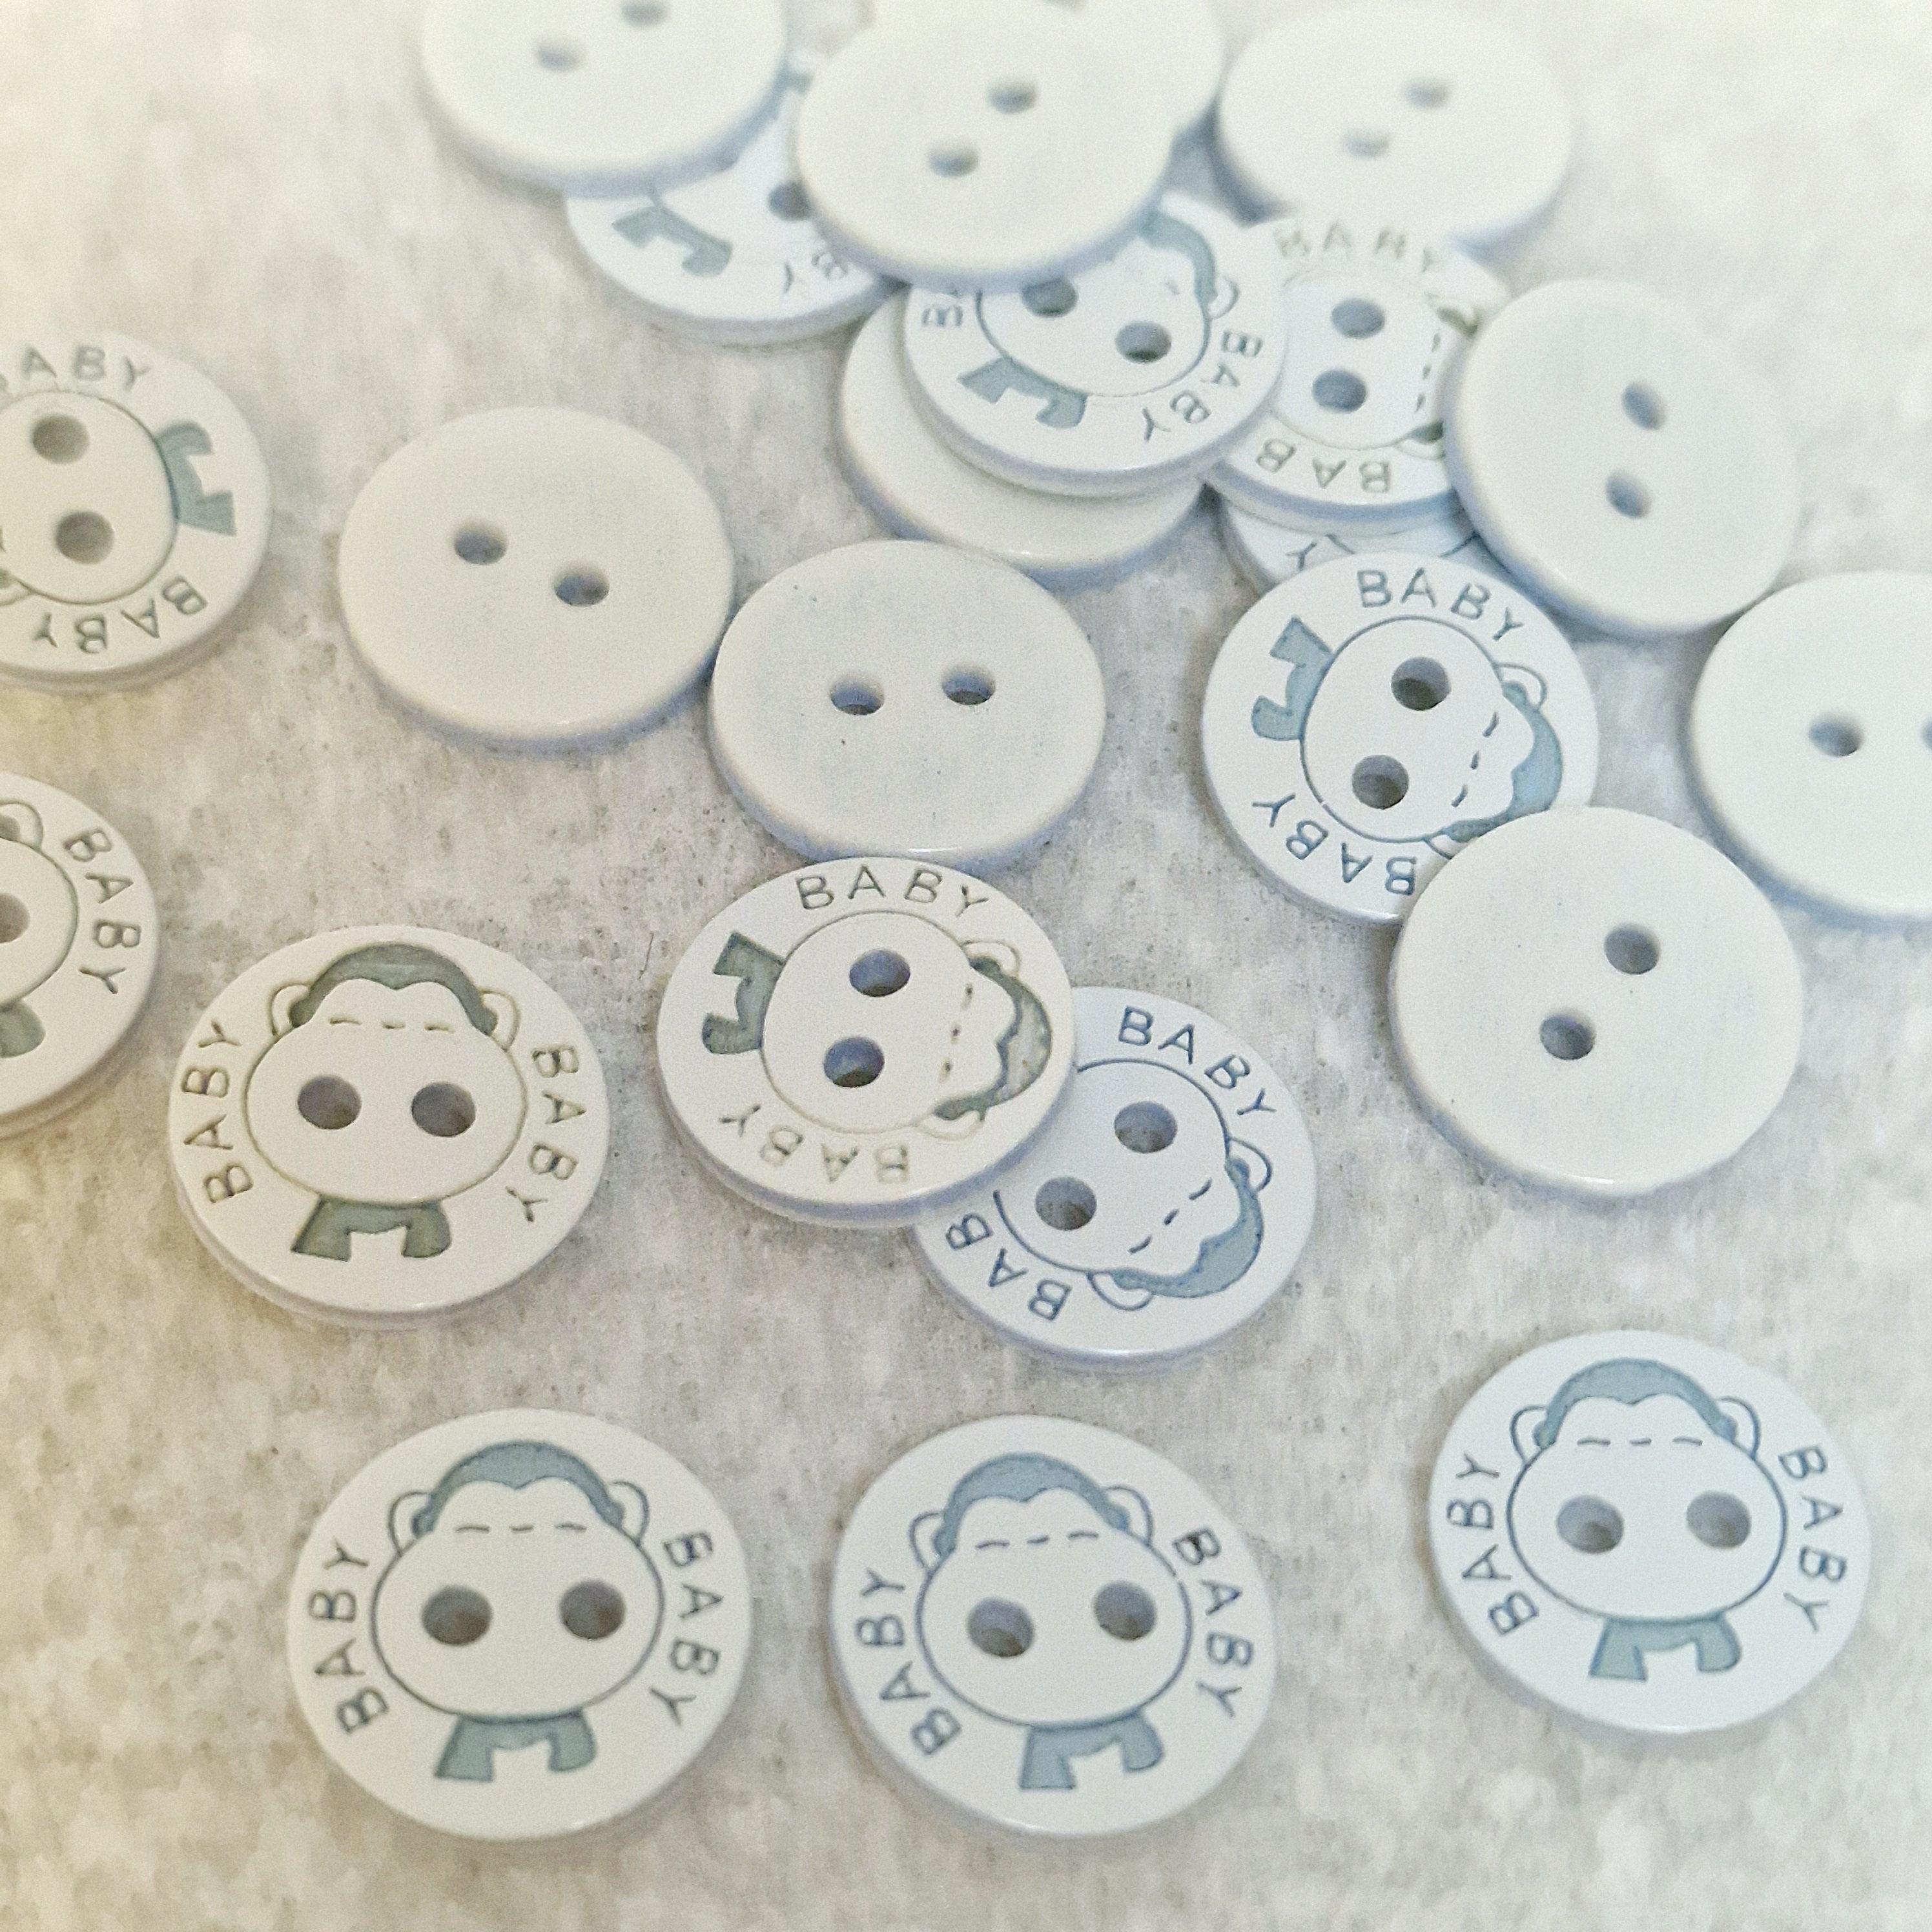 MajorCrafts 48pcs 12.5mm Light Blue & White 'Baby' Printed 2 Holes Small Round Resin Sewing Buttons